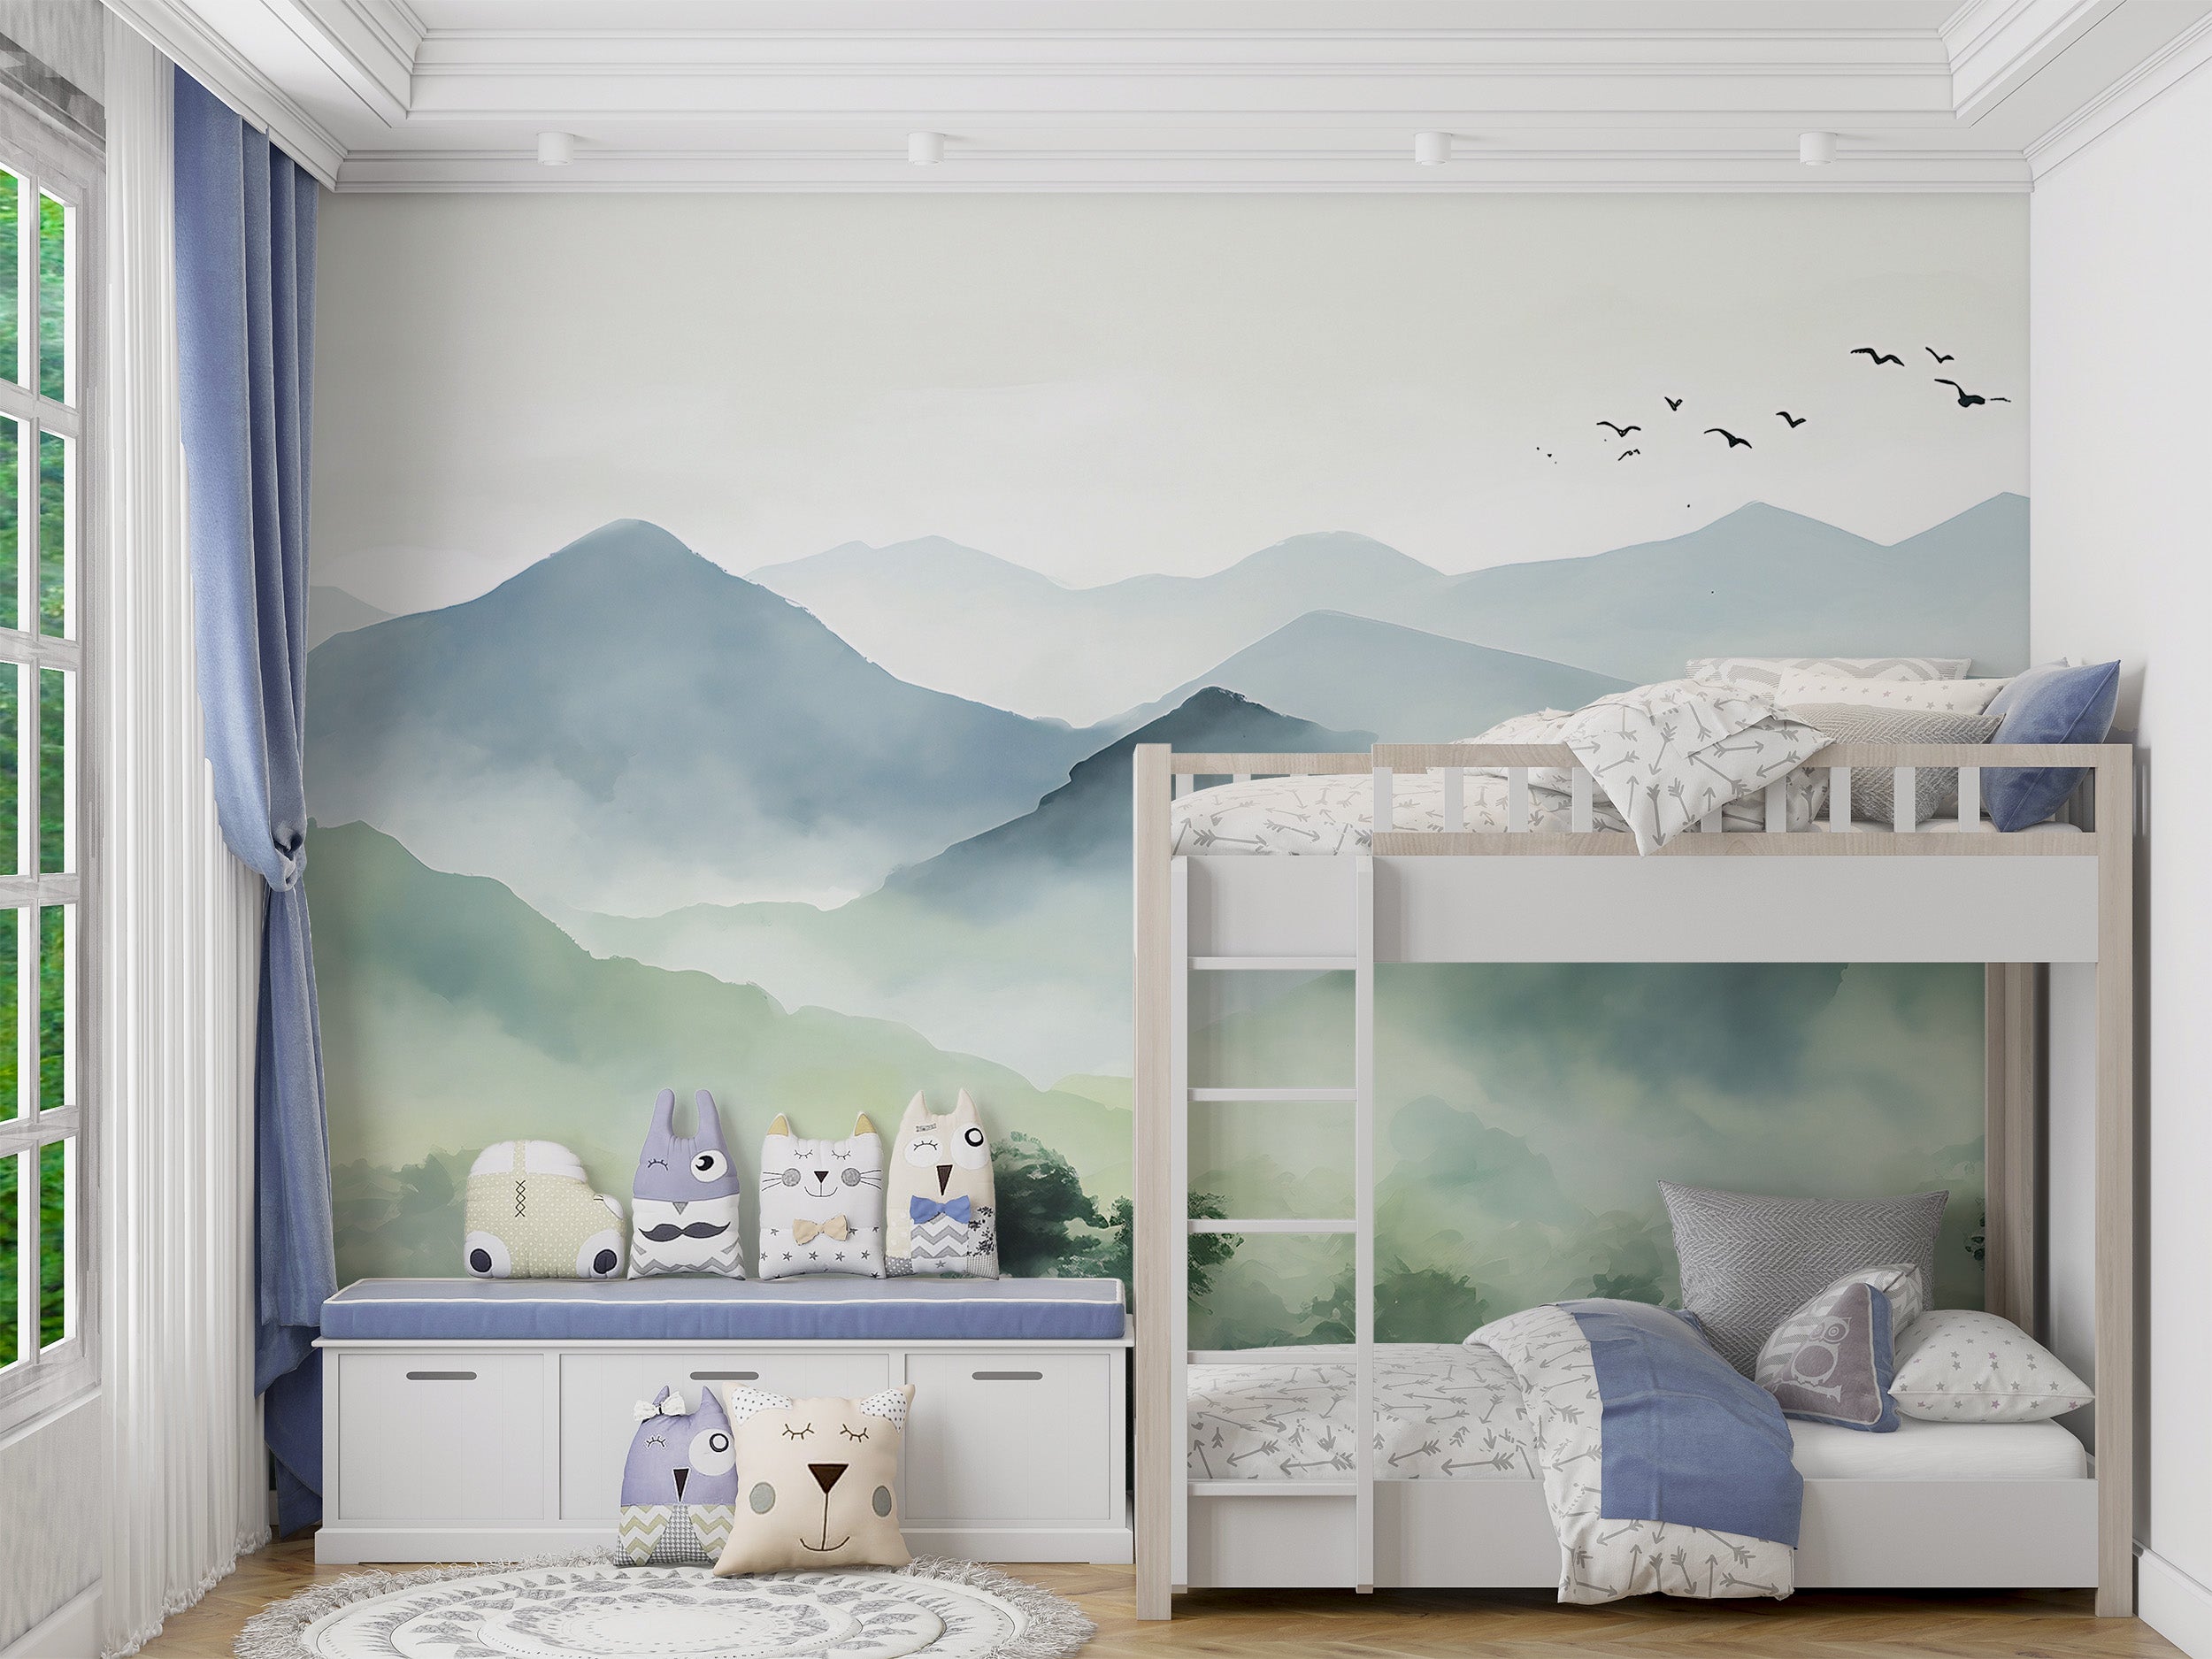 Effortless Application of Nature-Inspired Wall Art